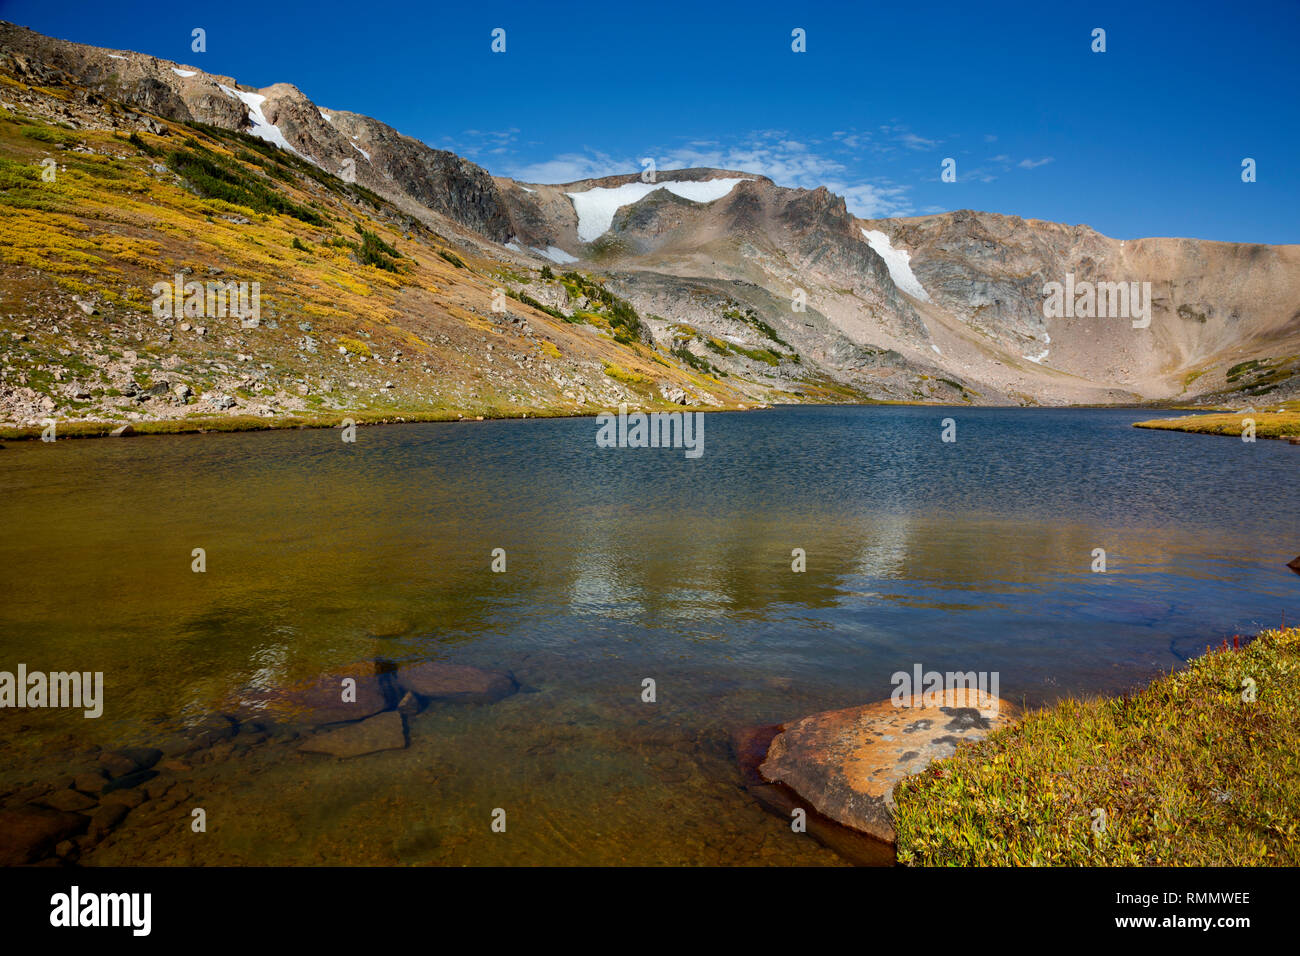 WY03730-00...WYOMING - Fall color on the hills and shore around Gardner Lake located on the Beartooth Loop National Recreation Trail in the Shoshone N Stock Photo